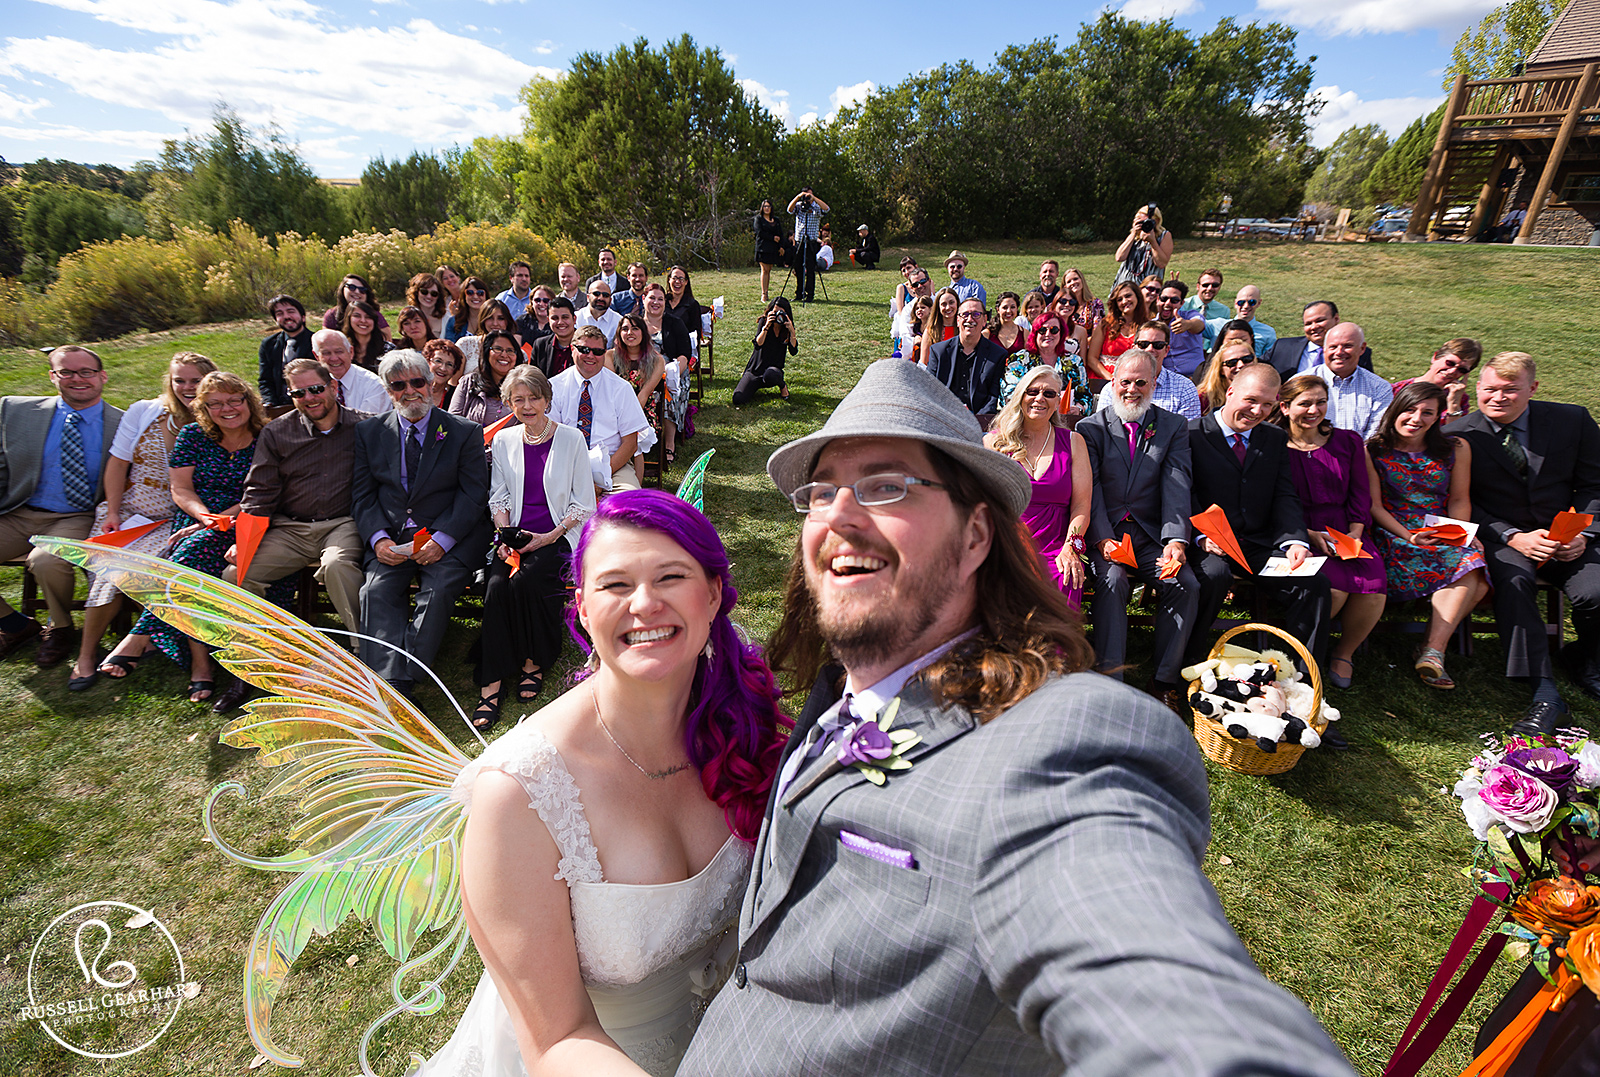 Wedding Photographer Selfie at own Wedding - Russell Gearhart Photography - www.gearhartphoto.com